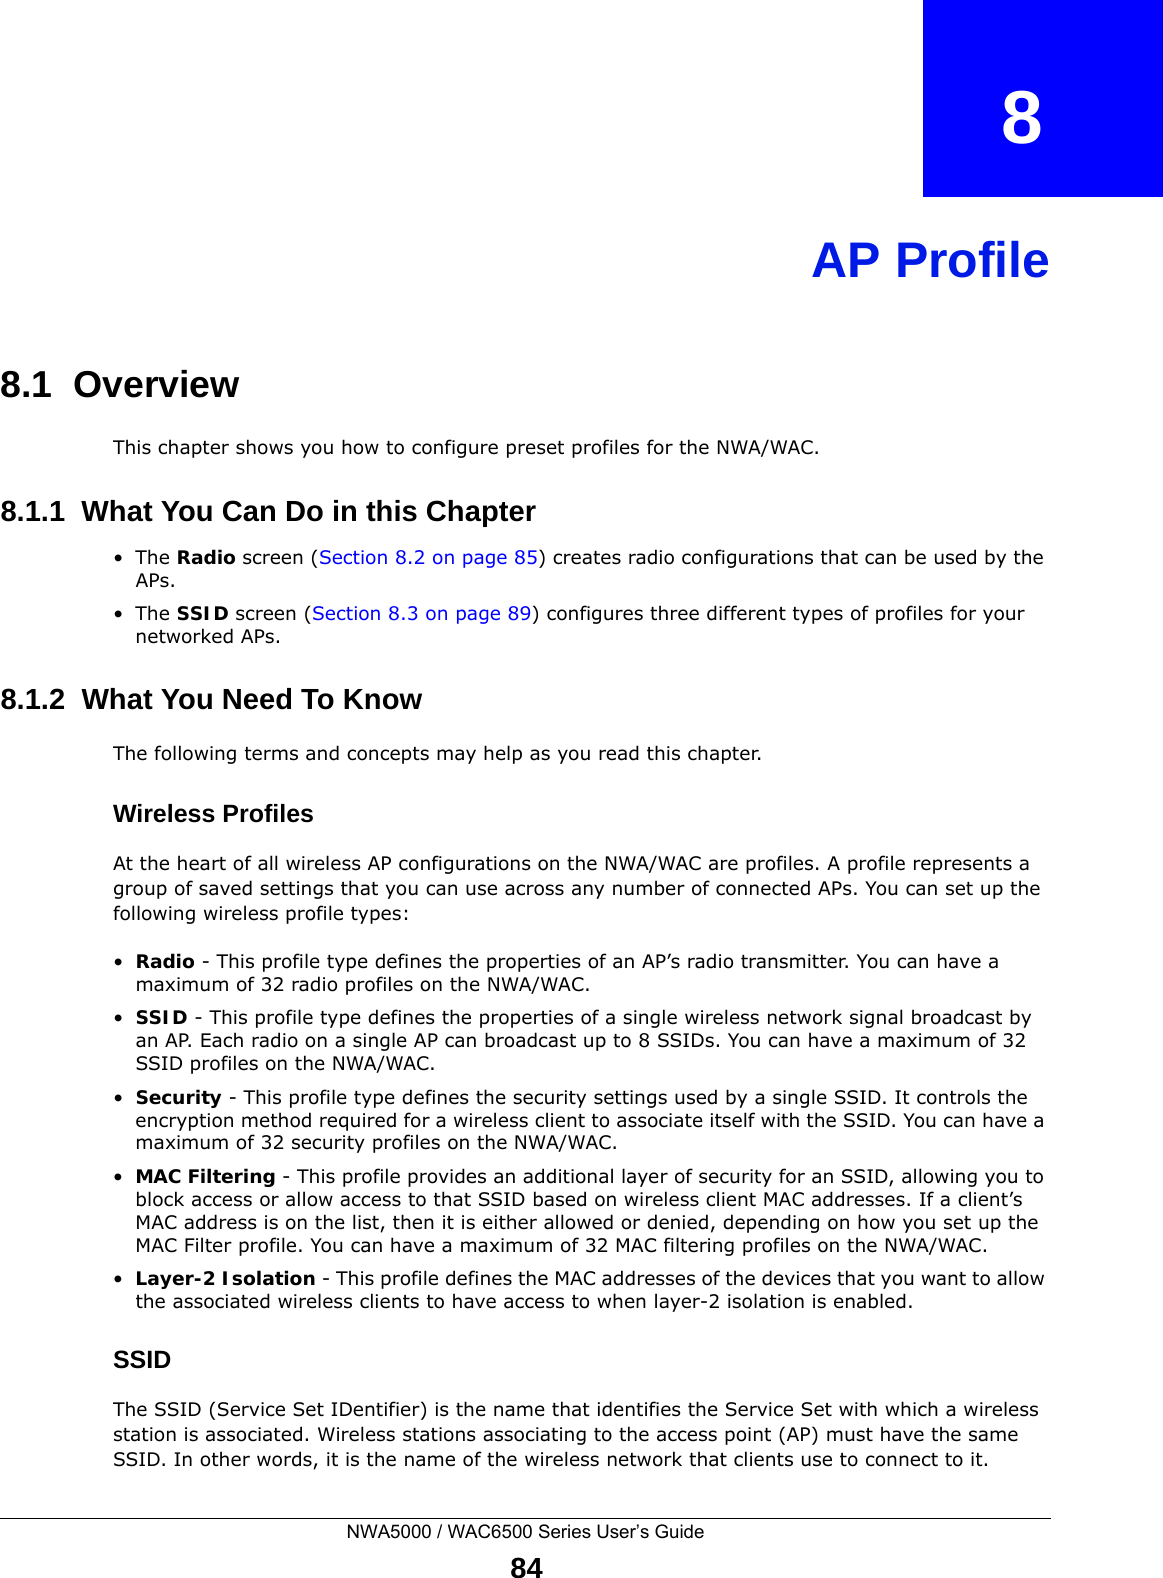 NWA5000 / WAC6500 Series User’s Guide84CHAPTER   8AP Profile8.1  OverviewThis chapter shows you how to configure preset profiles for the NWA/WAC. 8.1.1  What You Can Do in this Chapter•The Radio screen (Section 8.2 on page 85) creates radio configurations that can be used by the APs.•The SSID screen (Section 8.3 on page 89) configures three different types of profiles for your networked APs.8.1.2  What You Need To KnowThe following terms and concepts may help as you read this chapter.Wireless ProfilesAt the heart of all wireless AP configurations on the NWA/WAC are profiles. A profile represents a group of saved settings that you can use across any number of connected APs. You can set up the following wireless profile types:•Radio - This profile type defines the properties of an AP’s radio transmitter. You can have a maximum of 32 radio profiles on the NWA/WAC.•SSID - This profile type defines the properties of a single wireless network signal broadcast by an AP. Each radio on a single AP can broadcast up to 8 SSIDs. You can have a maximum of 32 SSID profiles on the NWA/WAC.•Security - This profile type defines the security settings used by a single SSID. It controls the encryption method required for a wireless client to associate itself with the SSID. You can have a maximum of 32 security profiles on the NWA/WAC.•MAC Filtering - This profile provides an additional layer of security for an SSID, allowing you to block access or allow access to that SSID based on wireless client MAC addresses. If a client’s MAC address is on the list, then it is either allowed or denied, depending on how you set up the MAC Filter profile. You can have a maximum of 32 MAC filtering profiles on the NWA/WAC.•Layer-2 Isolation - This profile defines the MAC addresses of the devices that you want to allow the associated wireless clients to have access to when layer-2 isolation is enabled. SSIDThe SSID (Service Set IDentifier) is the name that identifies the Service Set with which a wireless station is associated. Wireless stations associating to the access point (AP) must have the same SSID. In other words, it is the name of the wireless network that clients use to connect to it.